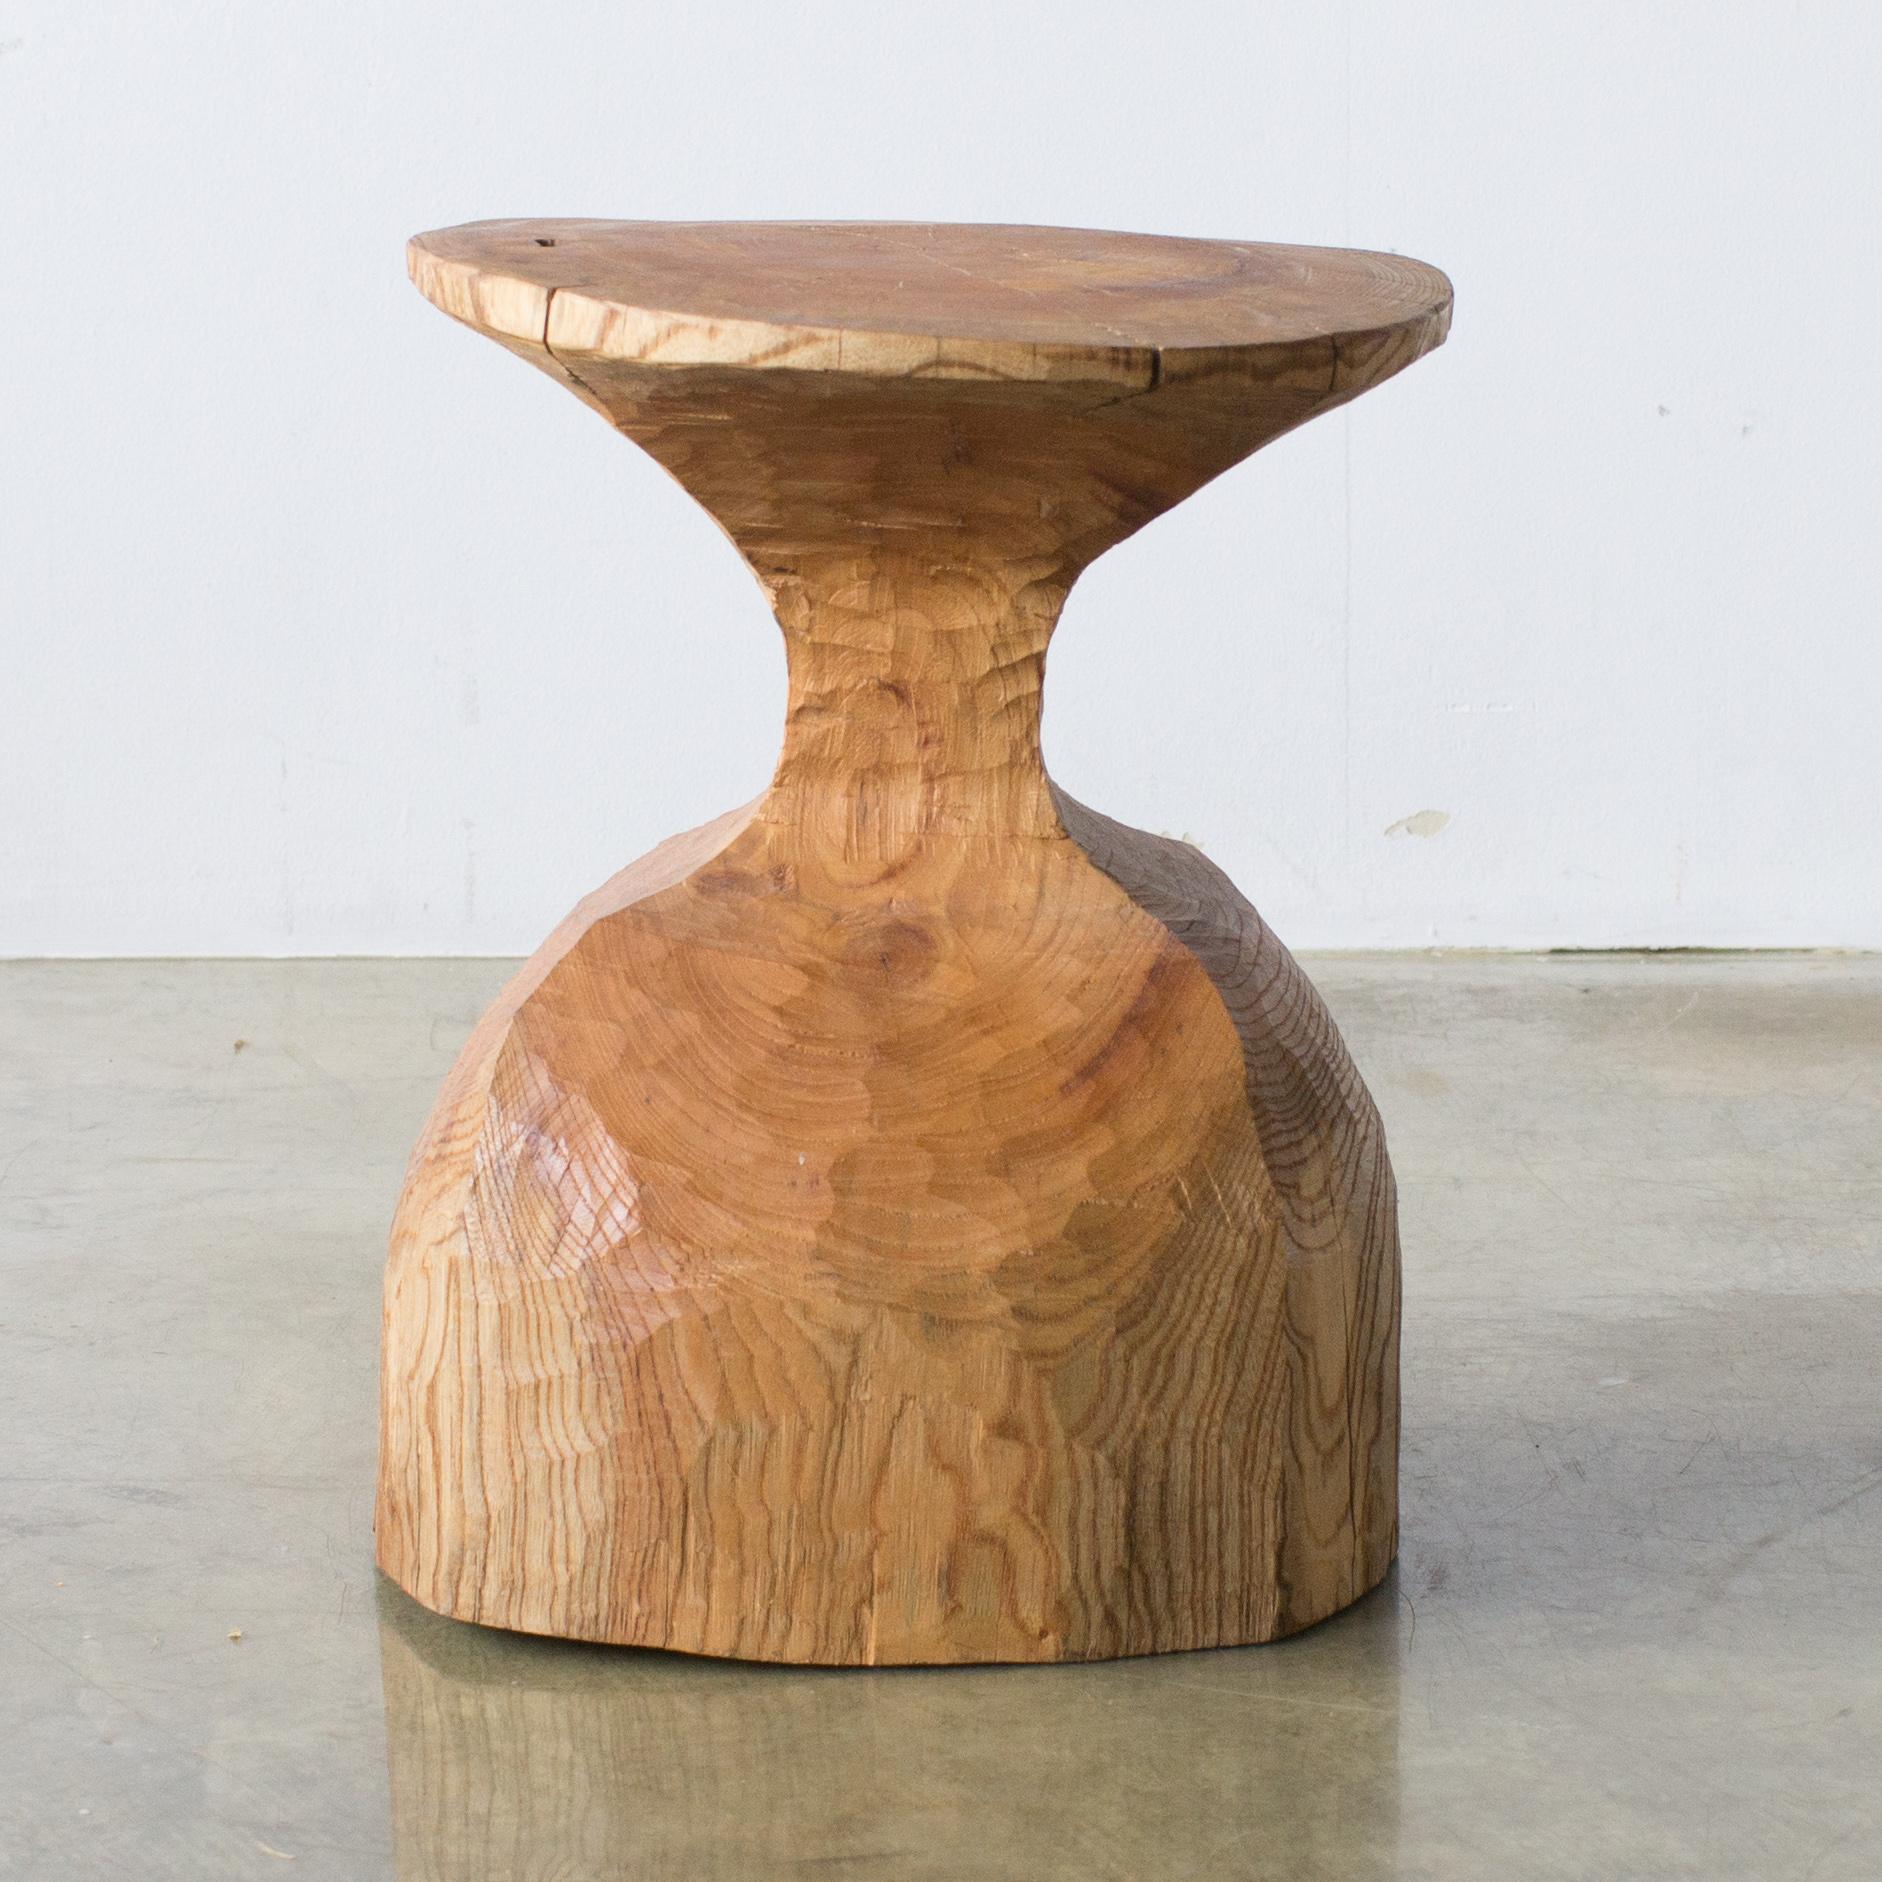 Name: Male star
Sculptural stool by Hiroyuki Nishimura and zone carved furniture
Material: zelkova.
This work is carved from log with some kinds of chainsaws.
Most of wood used for Nishimura's works are unable to use anything, these woods are